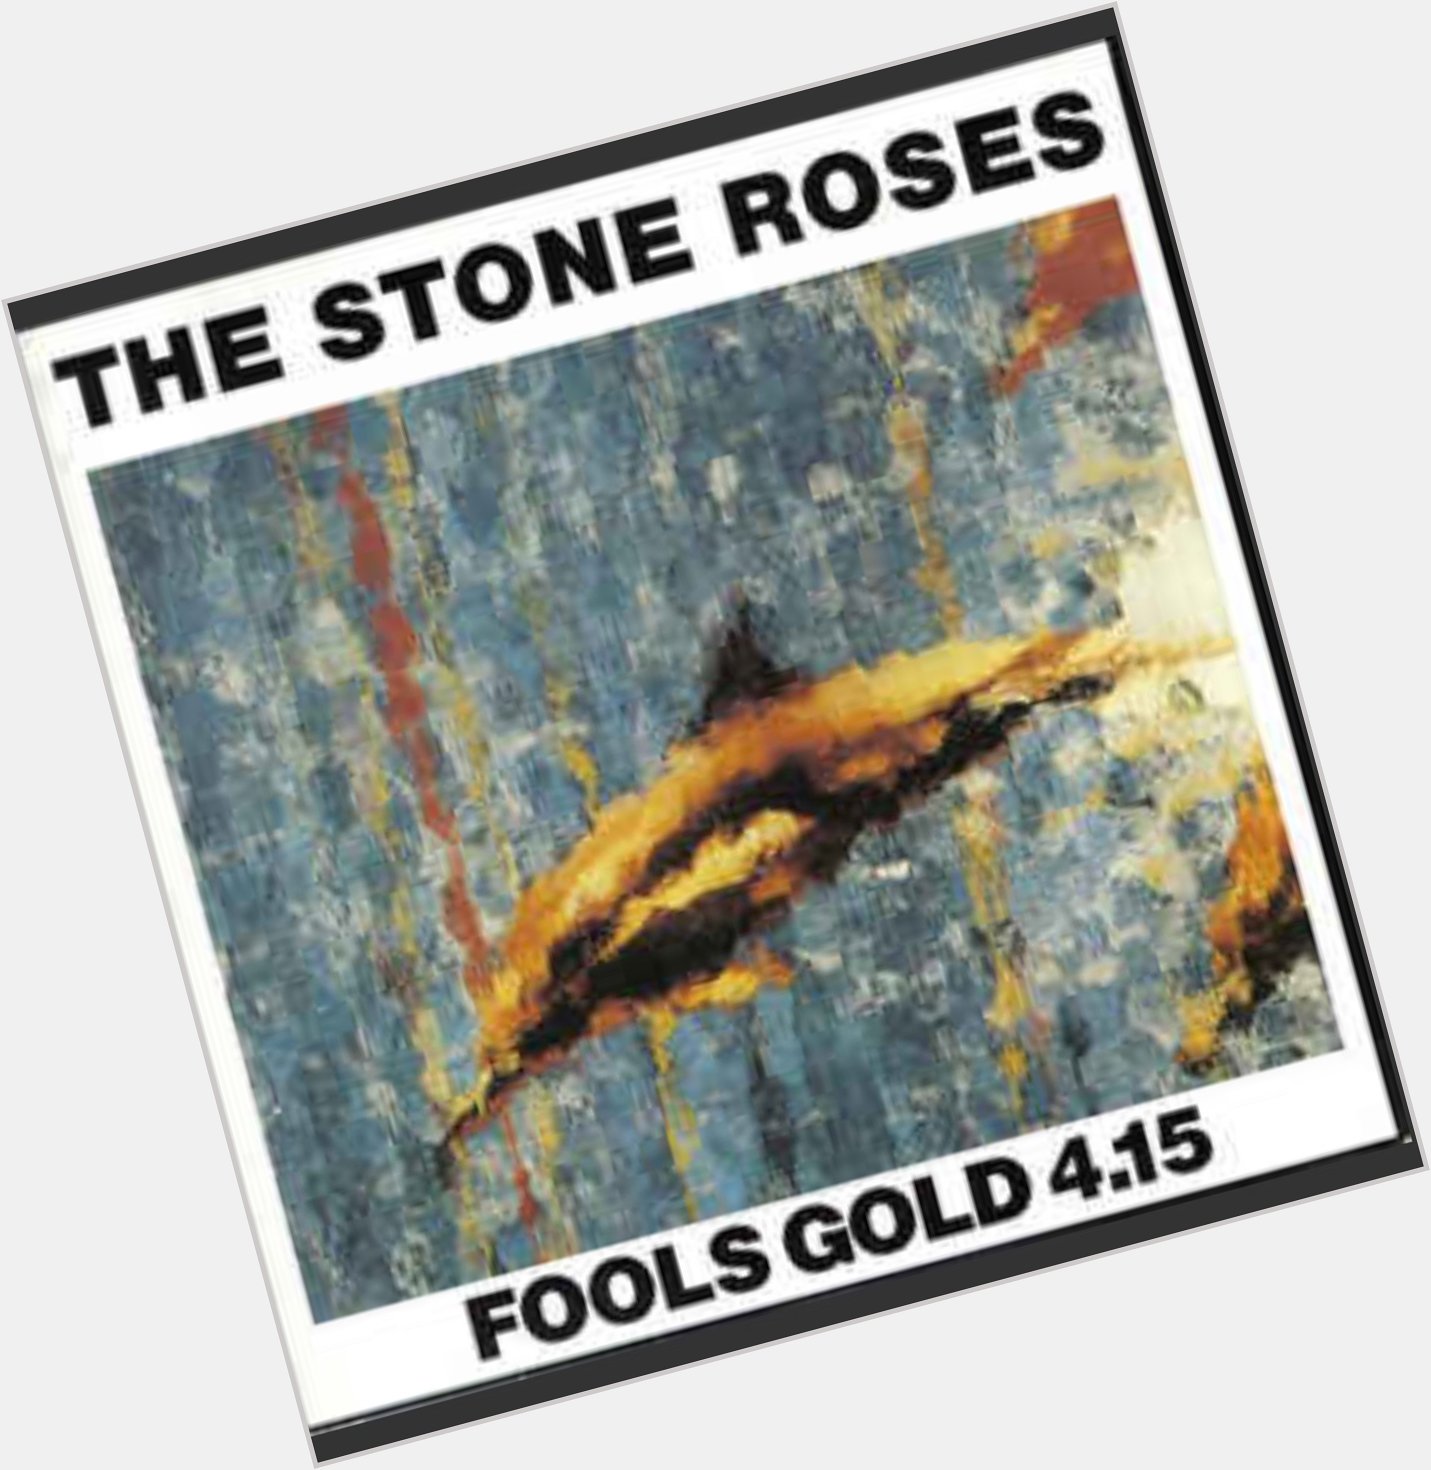 The Stone Roses Fool s Gold Happy Birthday to vocalist Ian Brown 